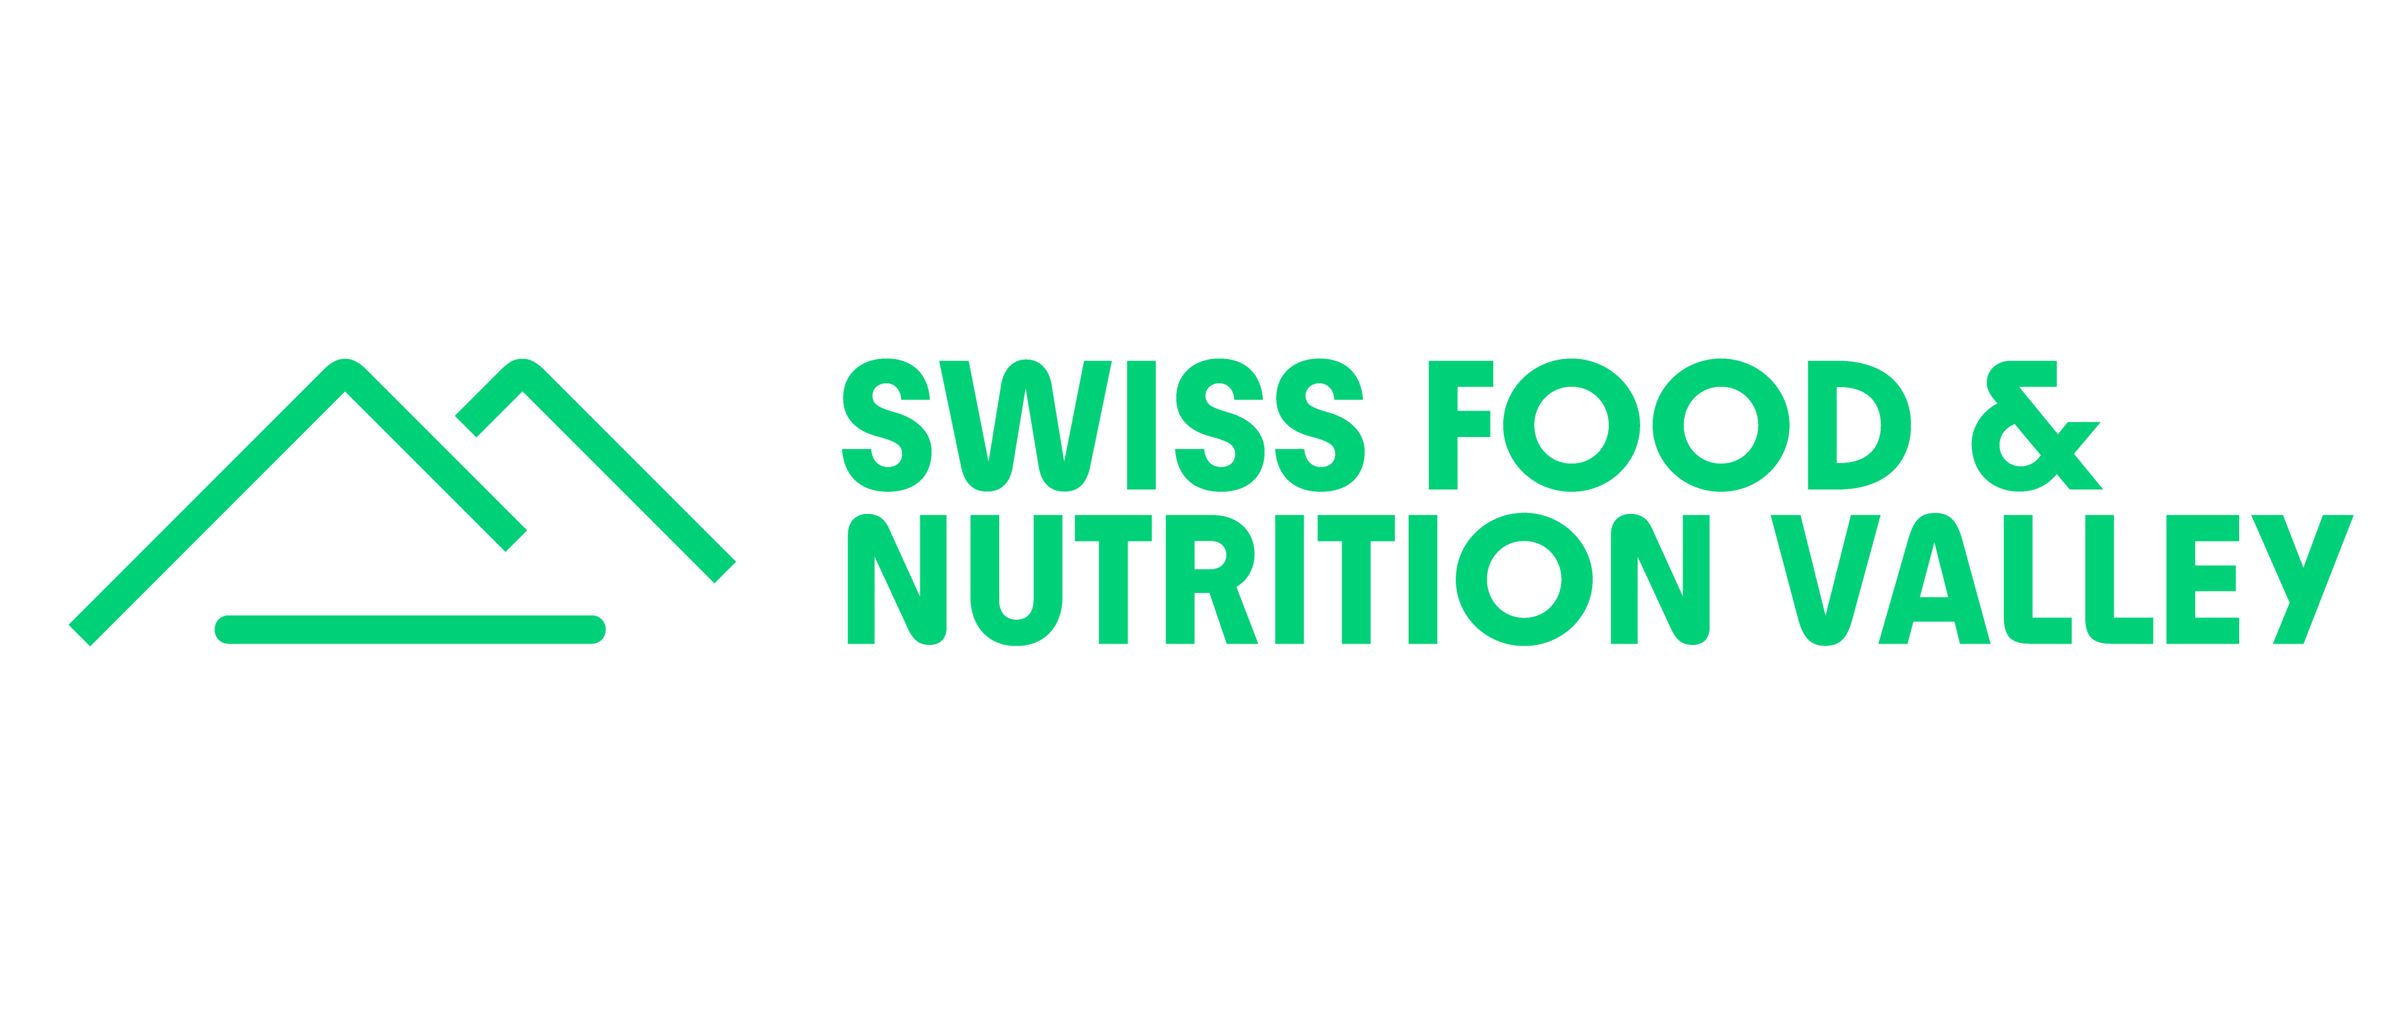 Swiss Food and Nutrition valley logo